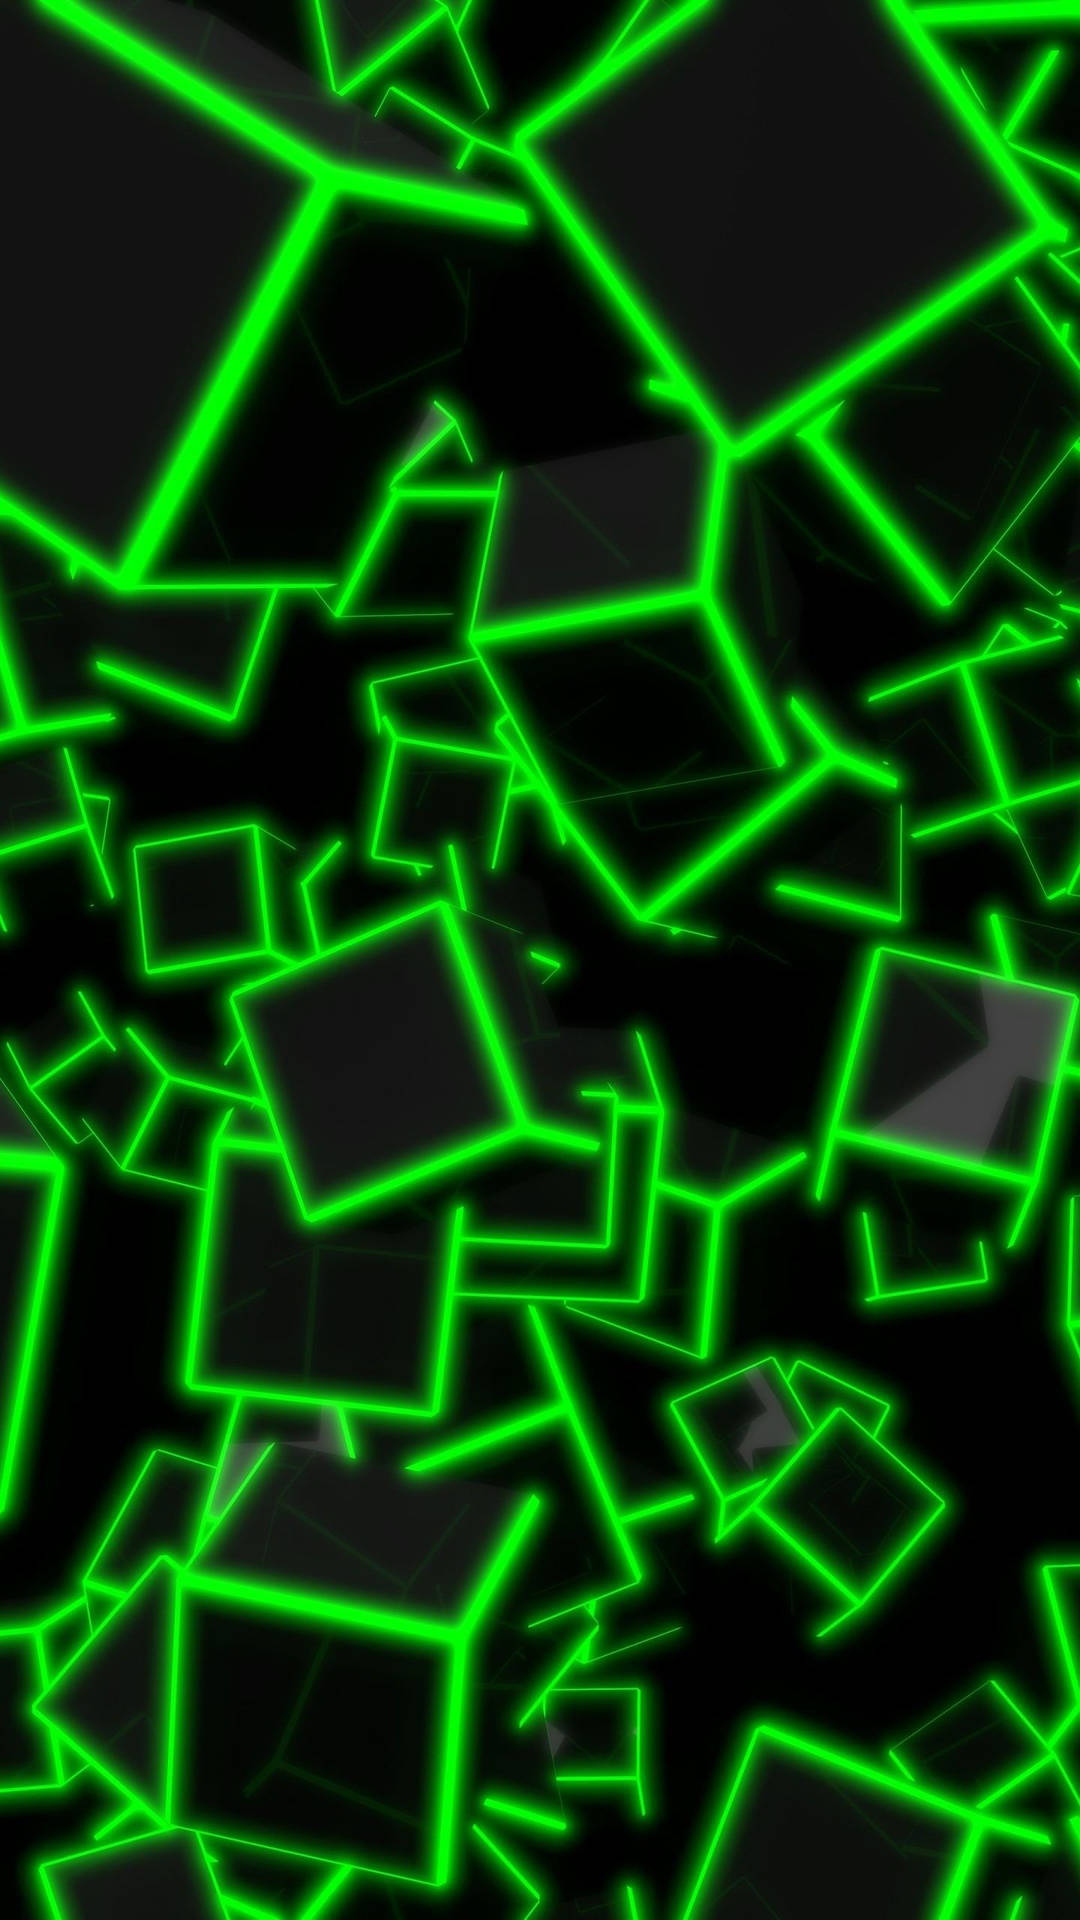 Overlapping Cool Green Squares Background